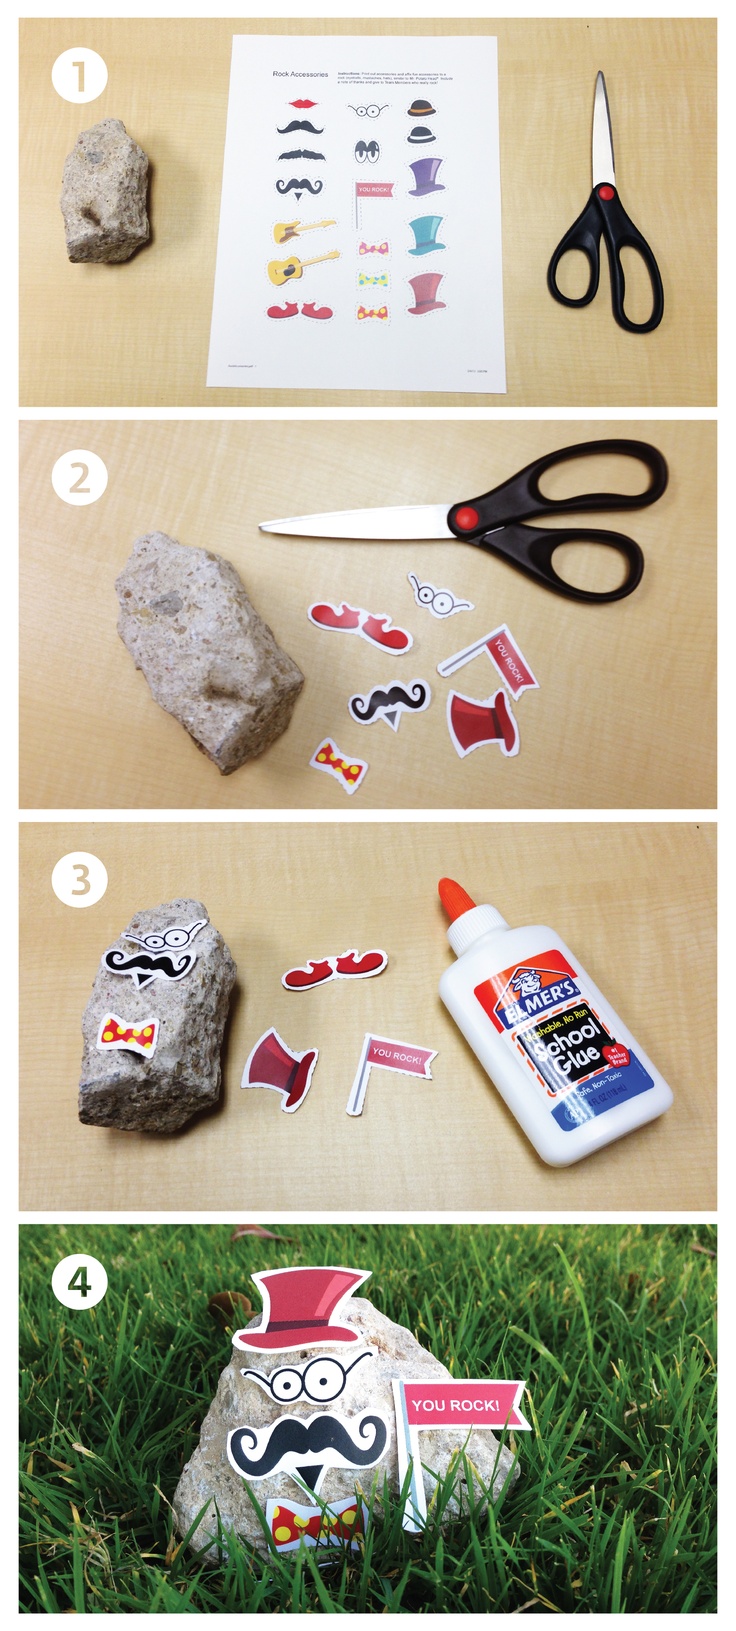 Create a YOU ROCK rock for your employees to show them how much they mean to you and the company.